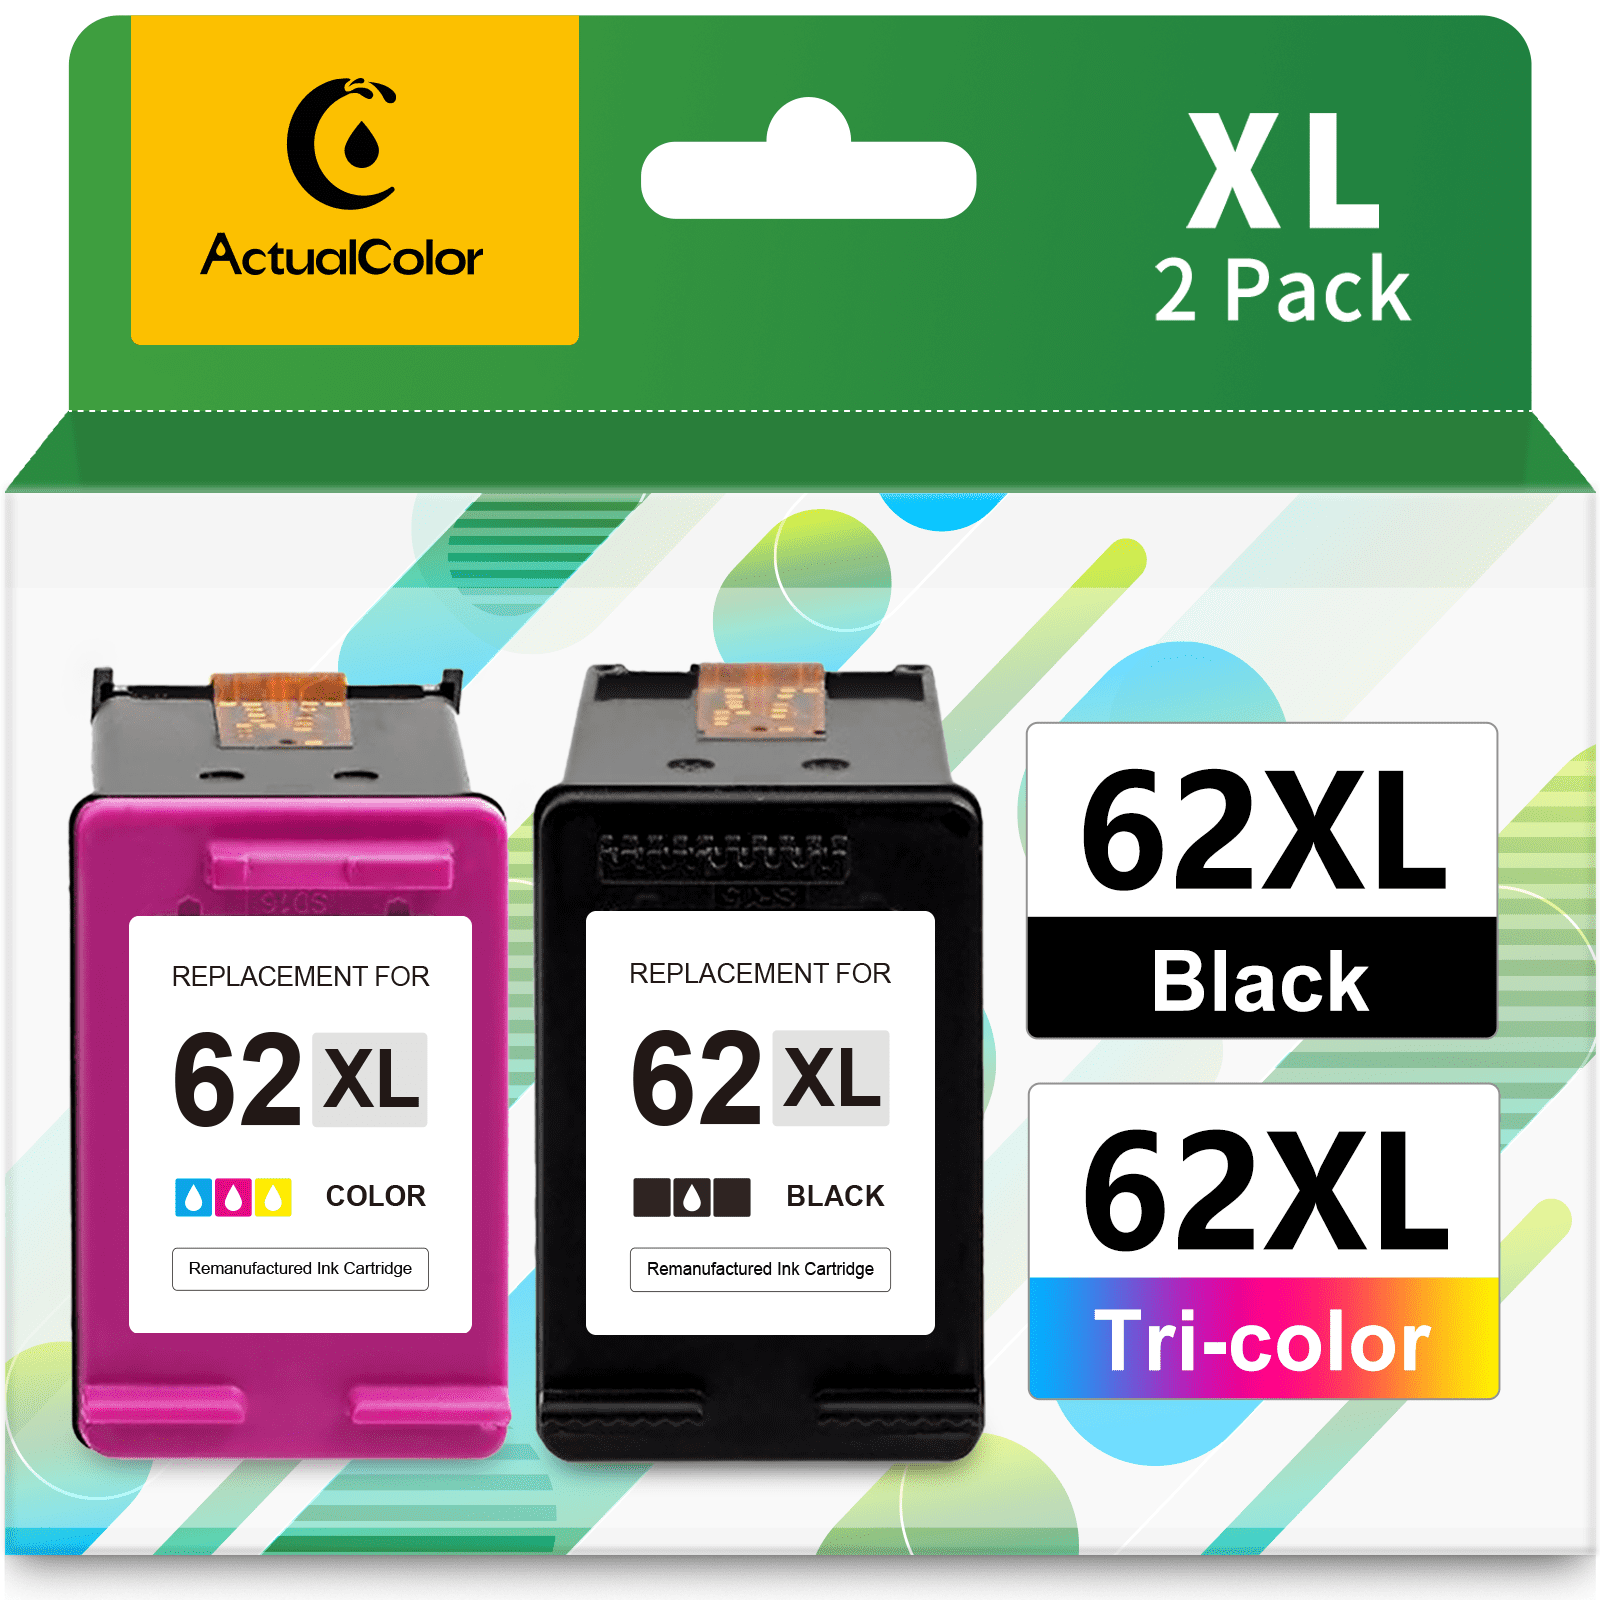 Economink Remanufactured 62 Black Ink Cartridge Replacement for HP 62XL  High Yield to use for Envy 7640 5660 5540 7645 7644 5643 5640 5661 5642  7643